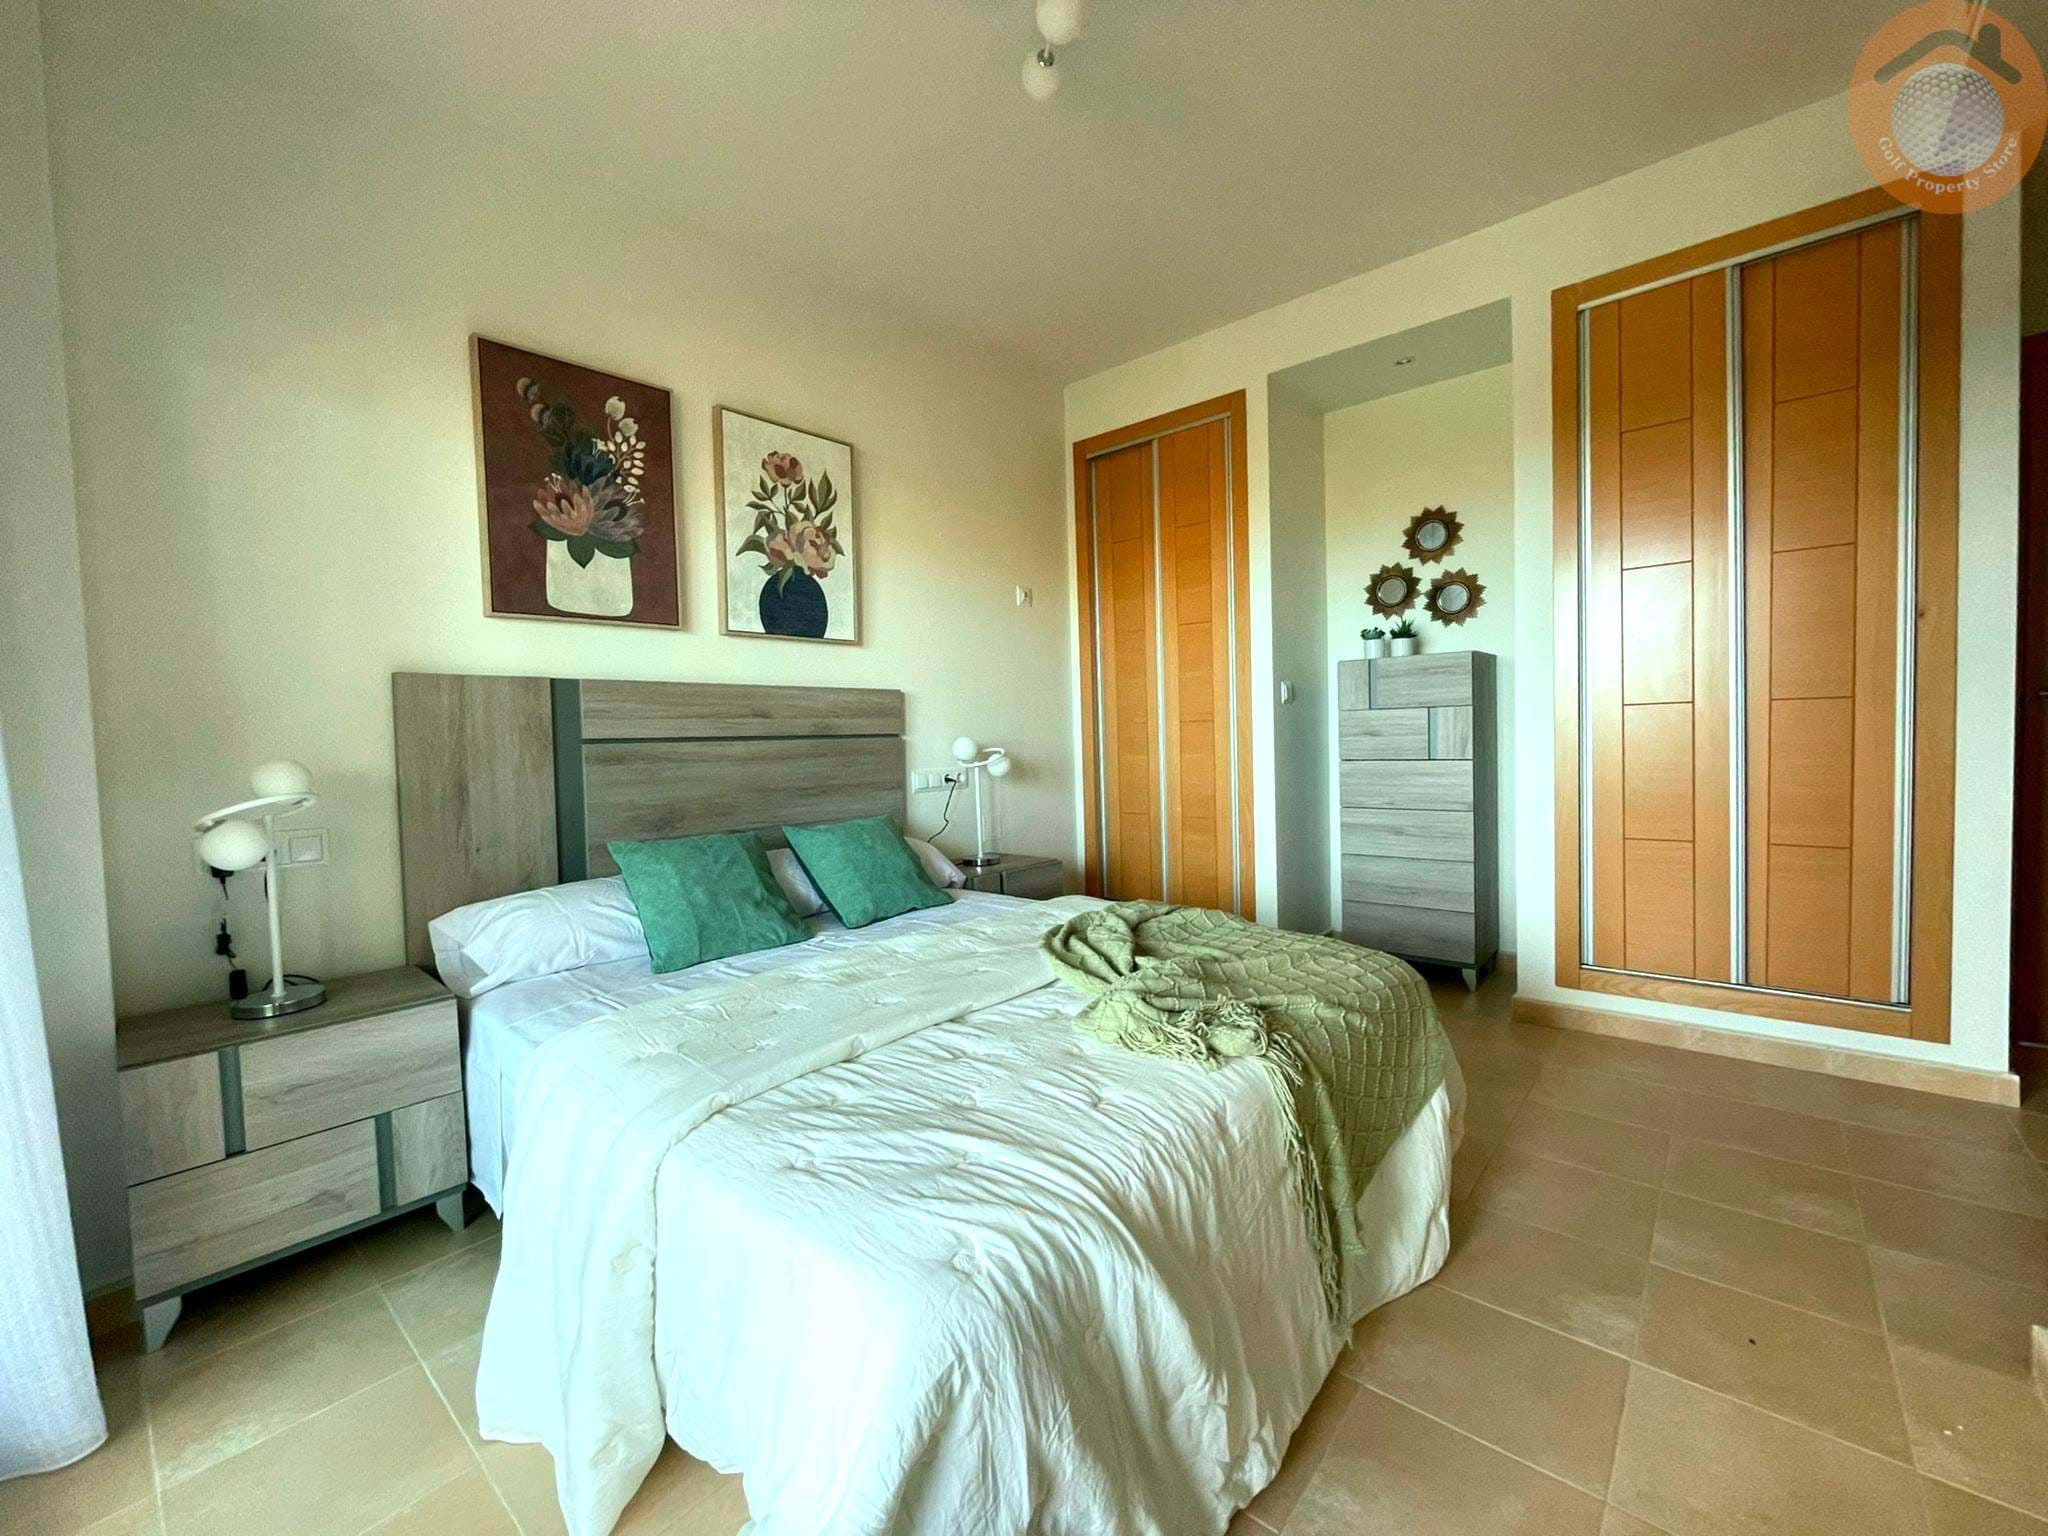 HACIENDA DEL ALAMO - 2 BED 2 BATH  FIRST FLOOR APARTMENT WITH PRIVATE HEATED PLUNGE POOL FULLY FURNISHED